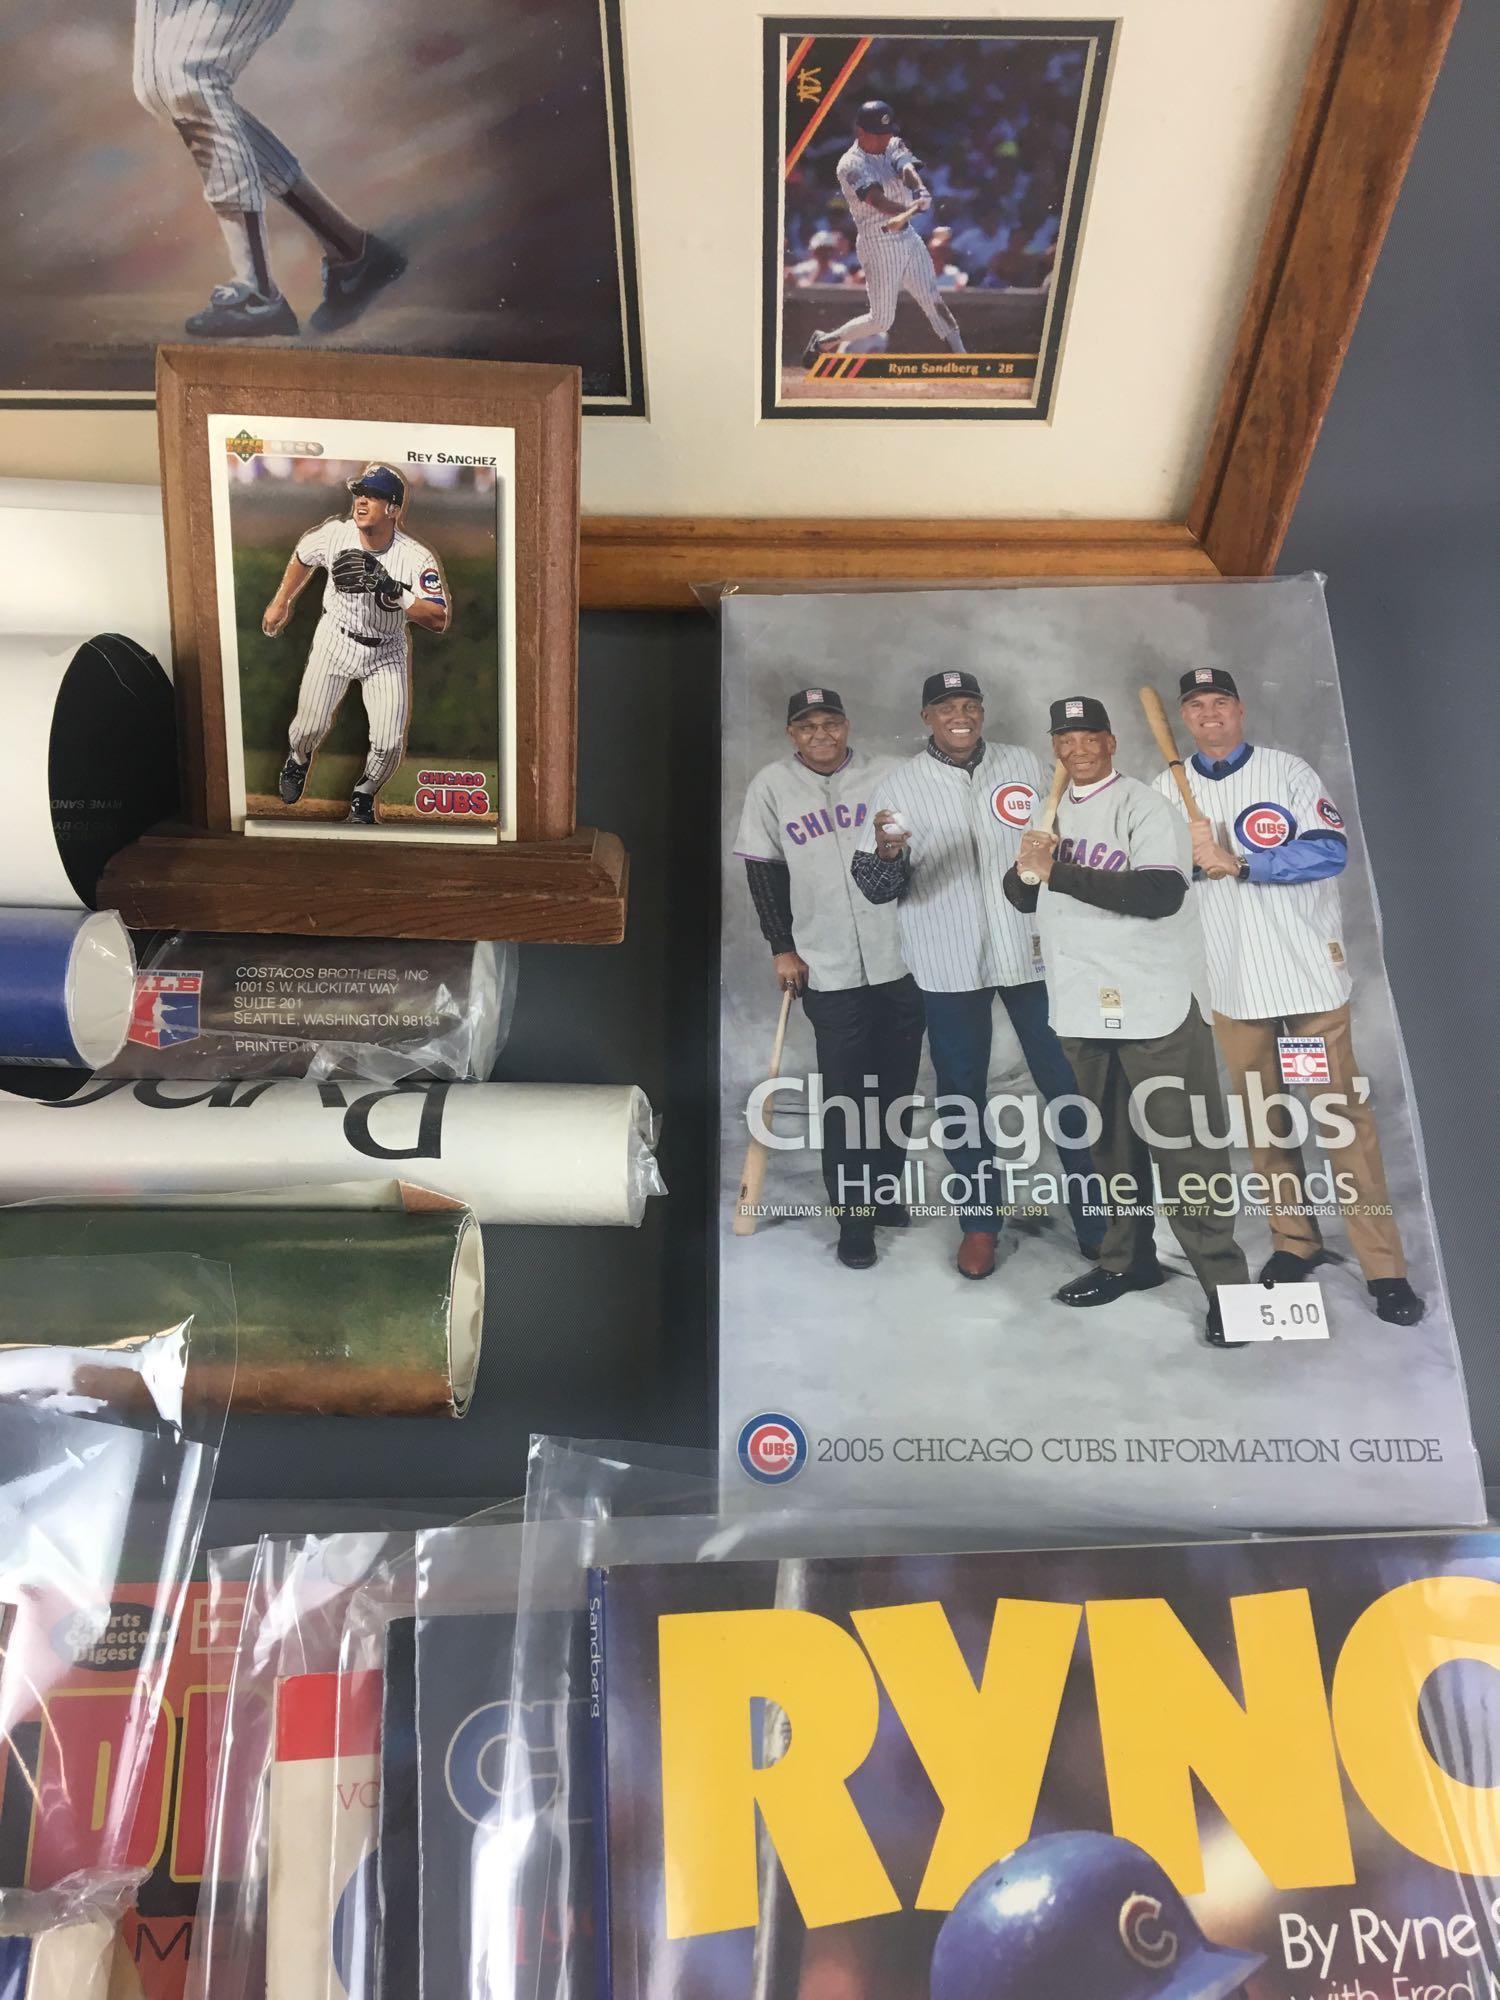 Large collection of Ryne Sandberg Chicago Cubs